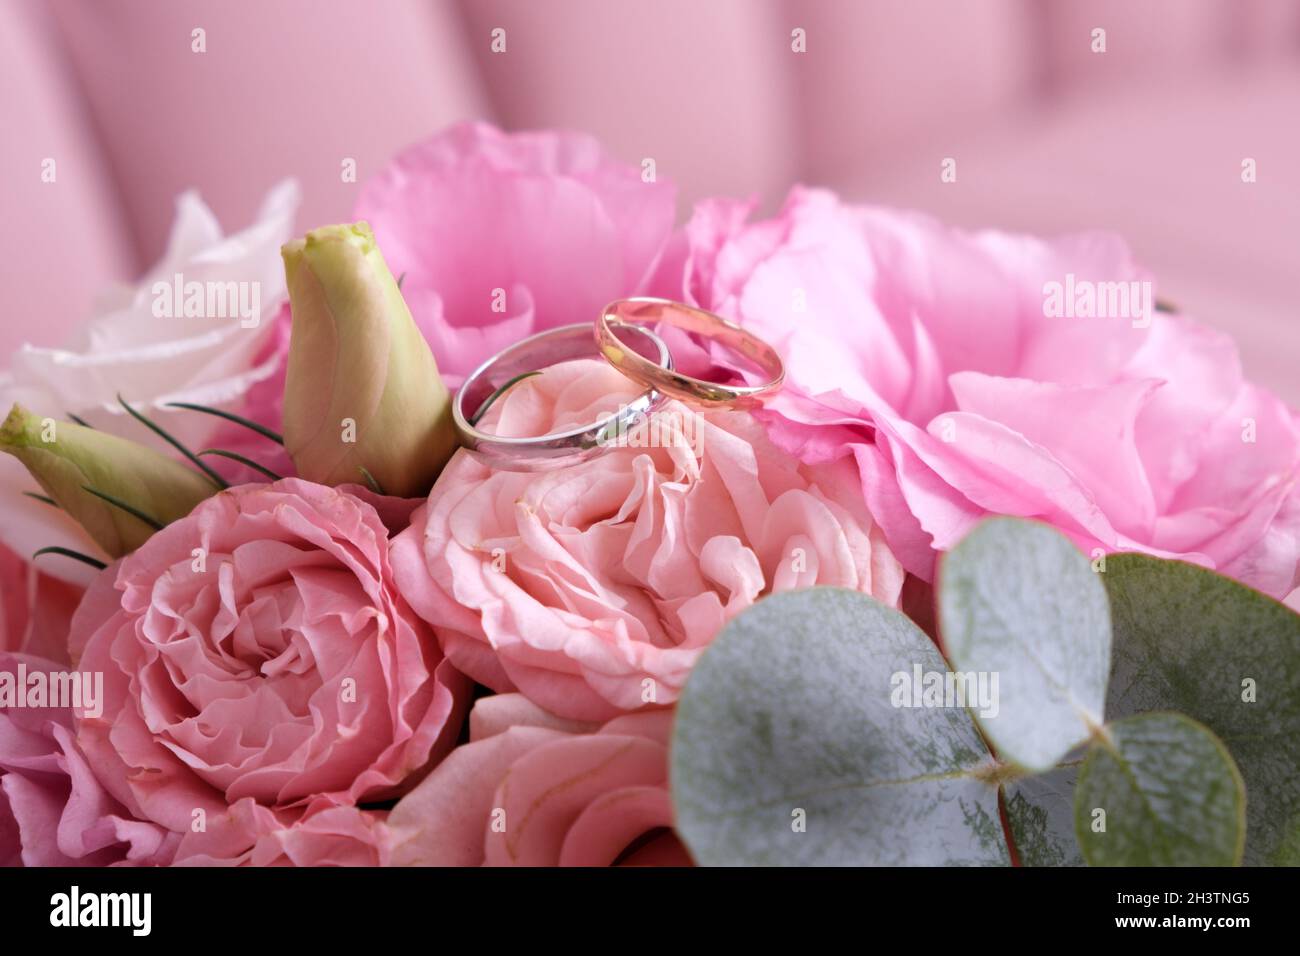 Two wedding rings of white and yellow gold on a bouquet of pink roses. Stock Photo